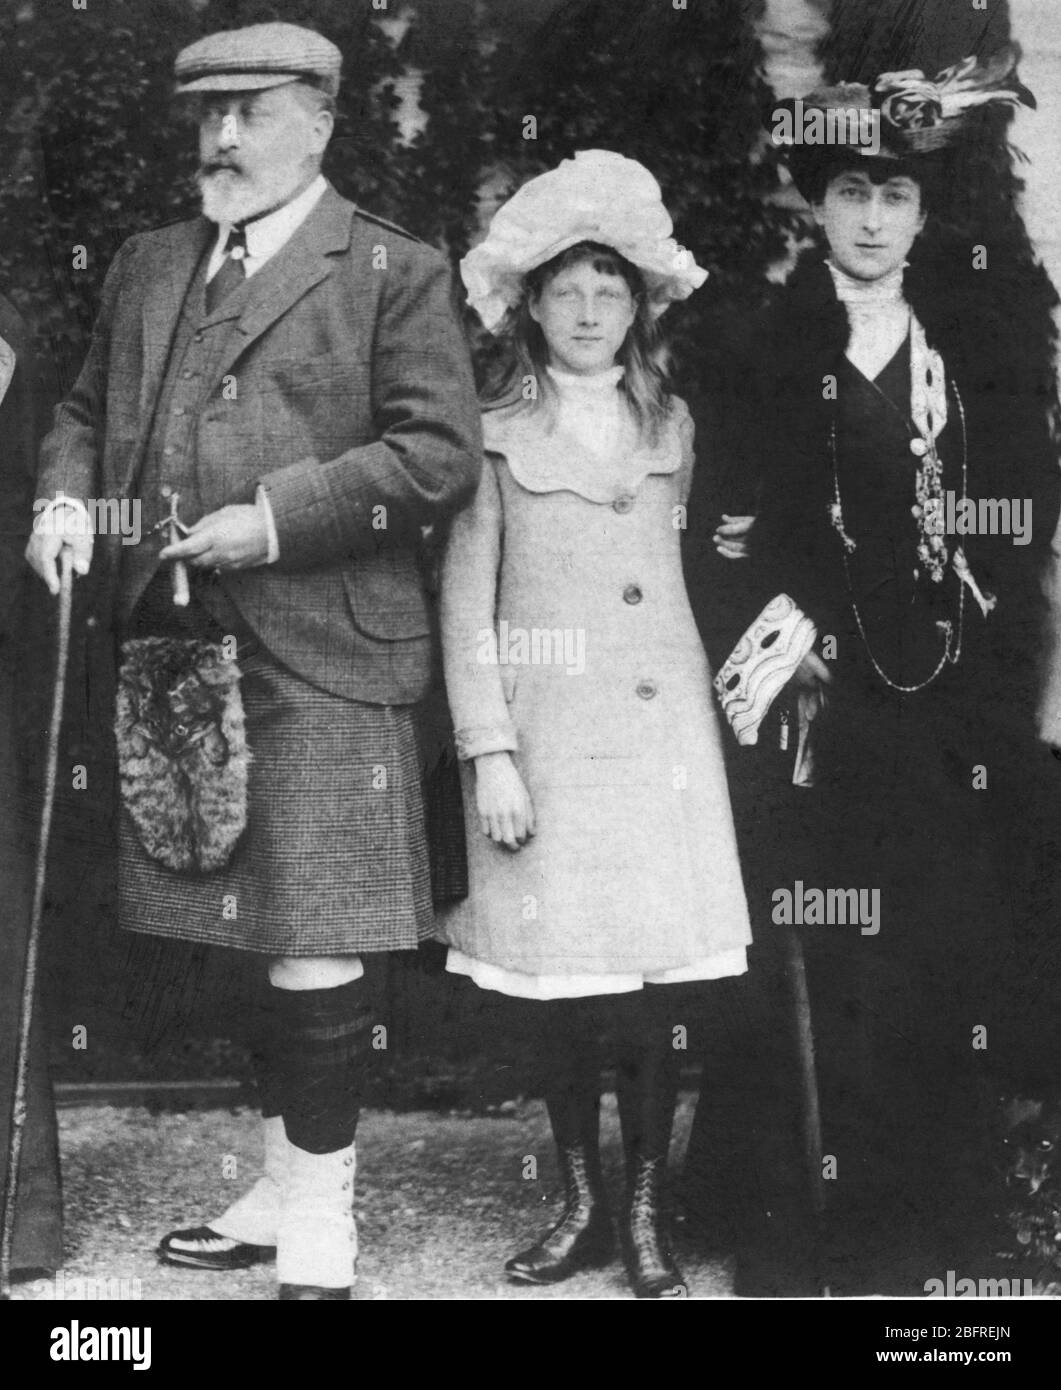 King Edward VII (1841-1910) with young Lady Alexander Duff (1891-1926), the King's granddaughter, and Princess Victoria (1868-1935), the King's second daughter, c. 1902.   To see my Royals-related vintage images, Search:  Prestor  vintage  Royal Stock Photo